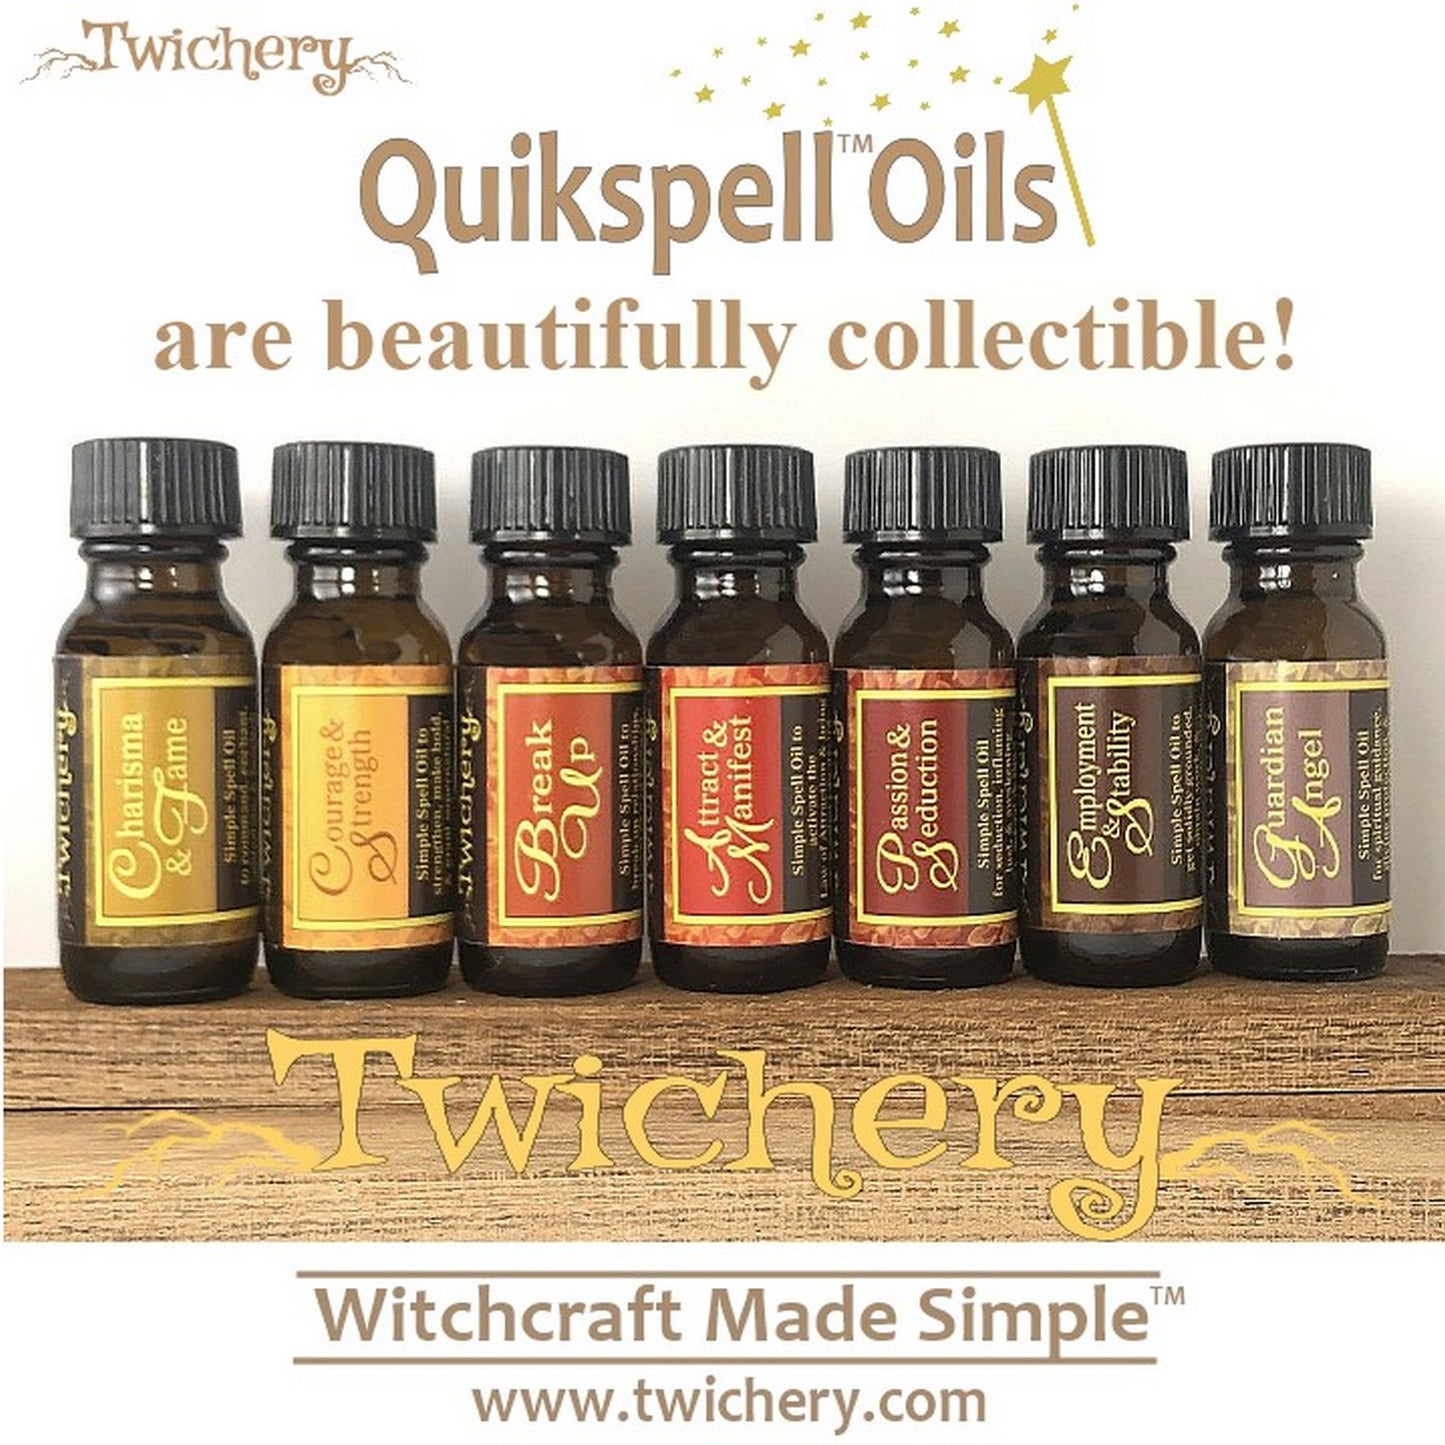 Collect all 24 Twichery Quikspell Oils for all your magickal needs, including getting rid of bad habits! Hoodoo, Voodoo, Wicca, Witchcraft Made Simple